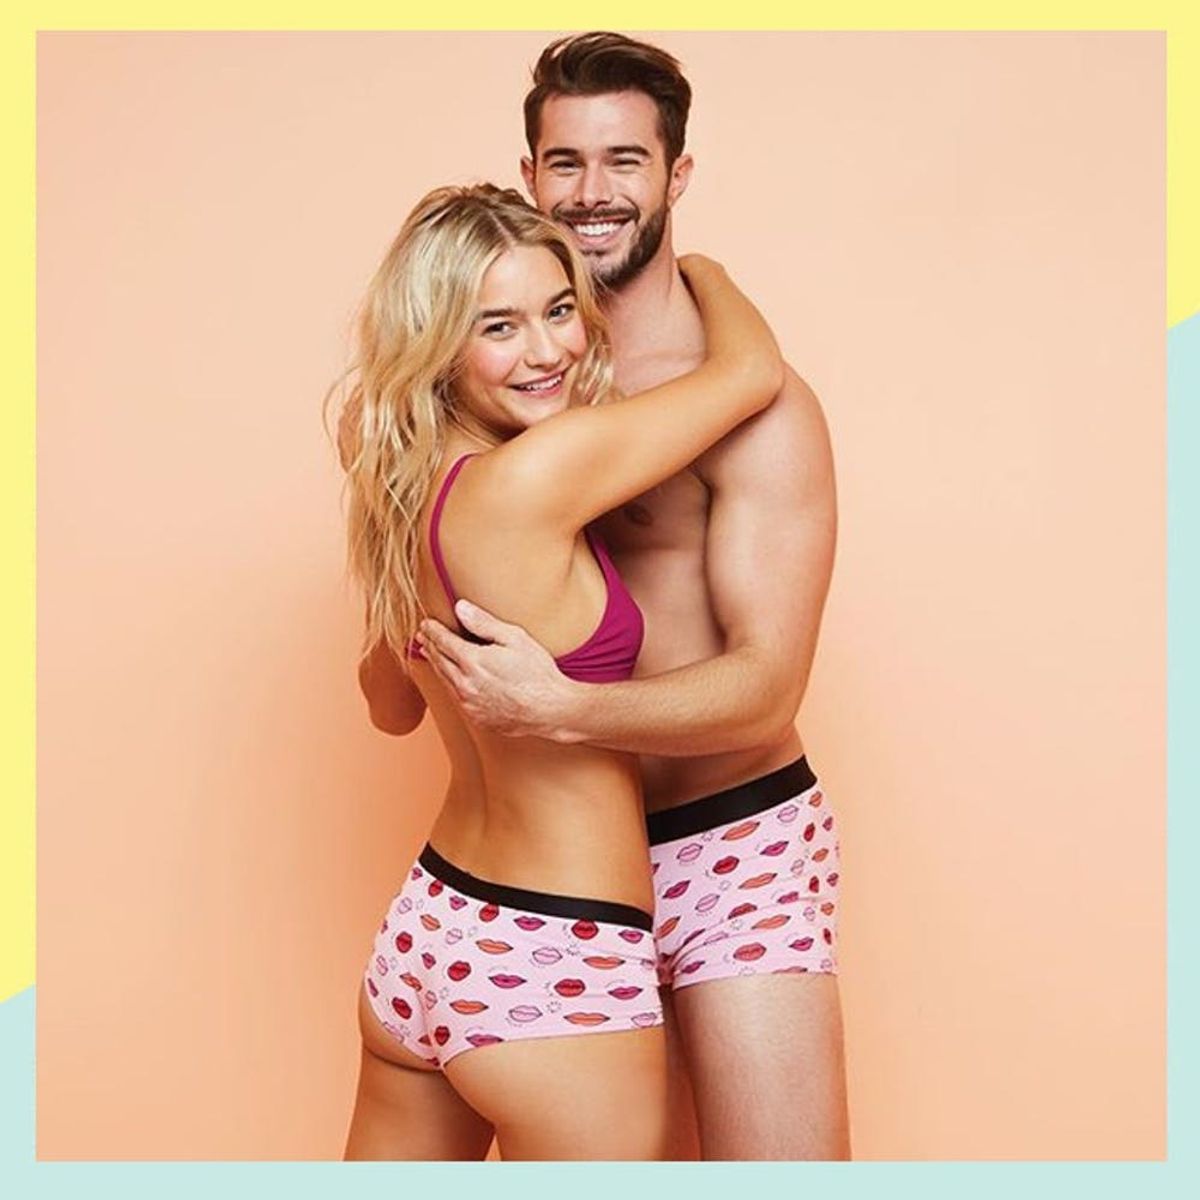 Would You Wear Matching Couples’ Underwear With Your S.O.?